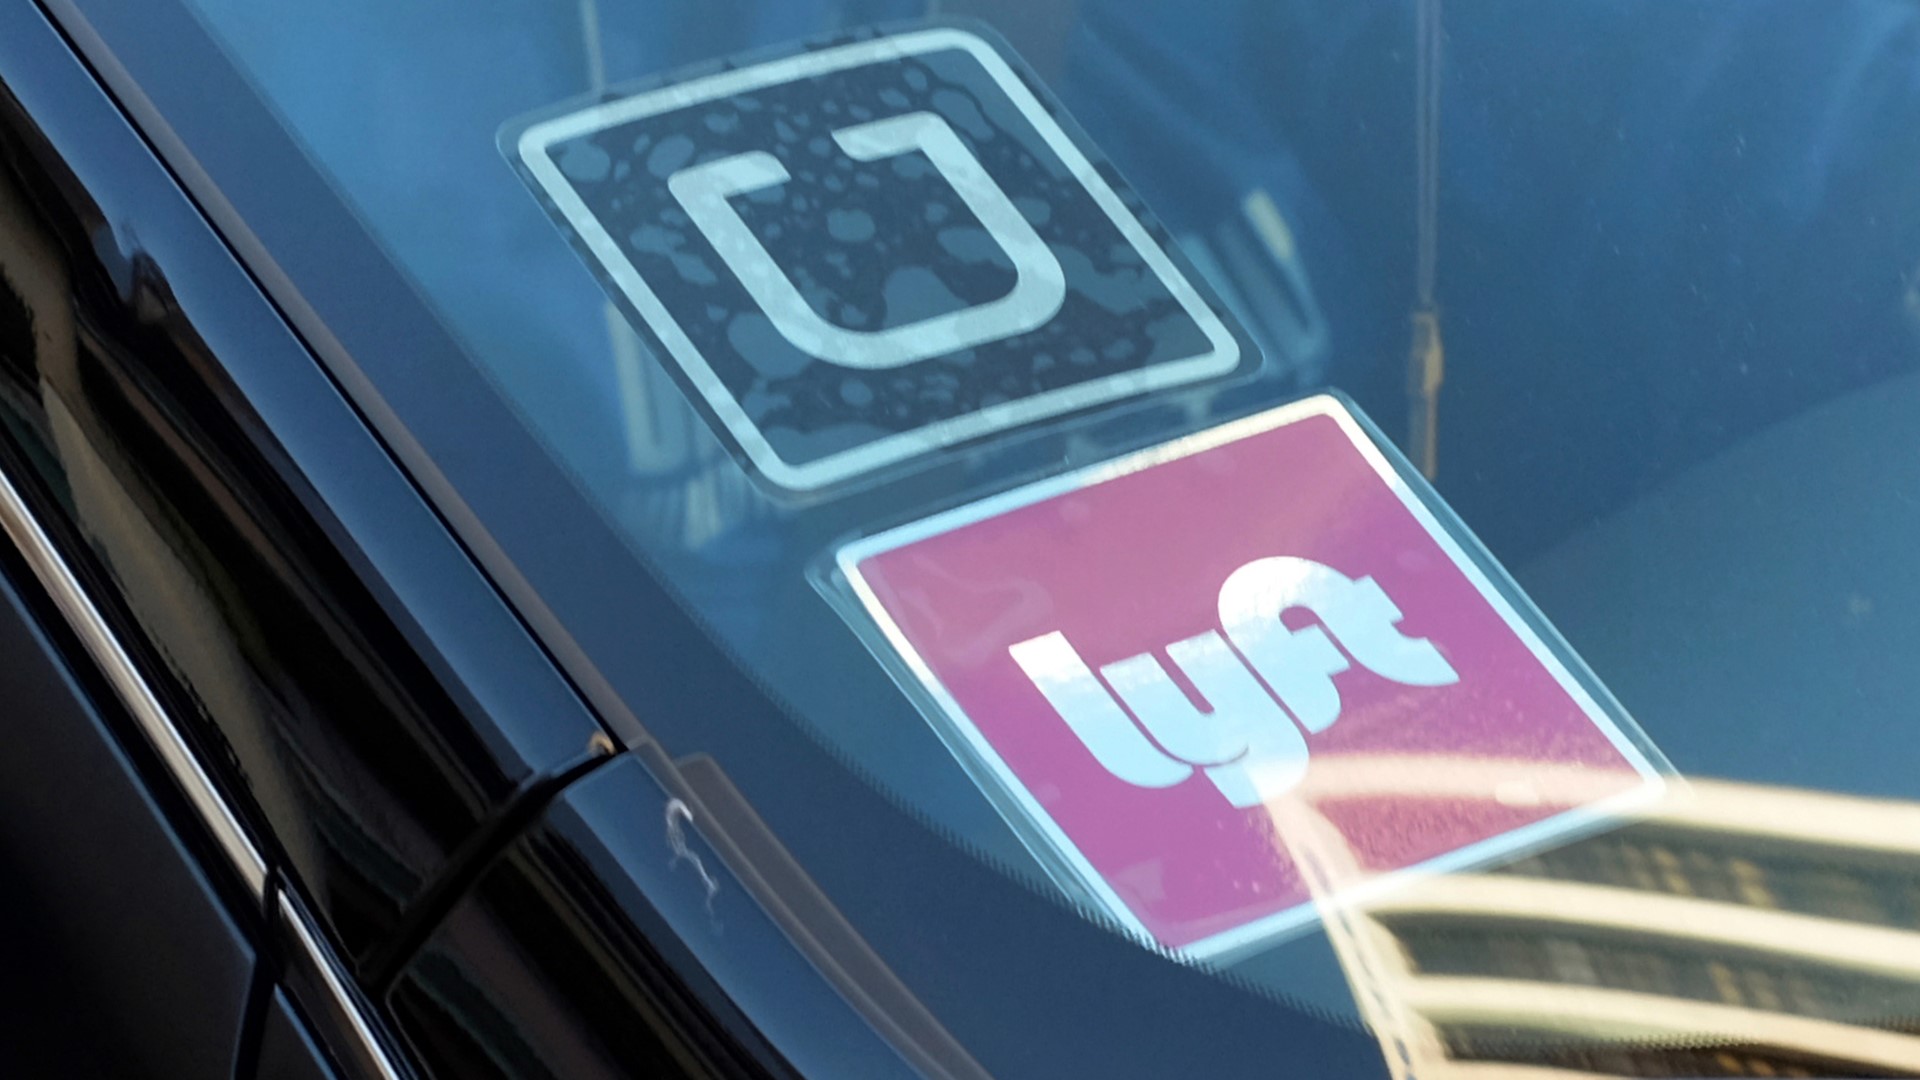 On Monday state lawmakers, along with the Minneapolis City Council, said they had reached a compromise in the debate on rideshare minimum wage pay.